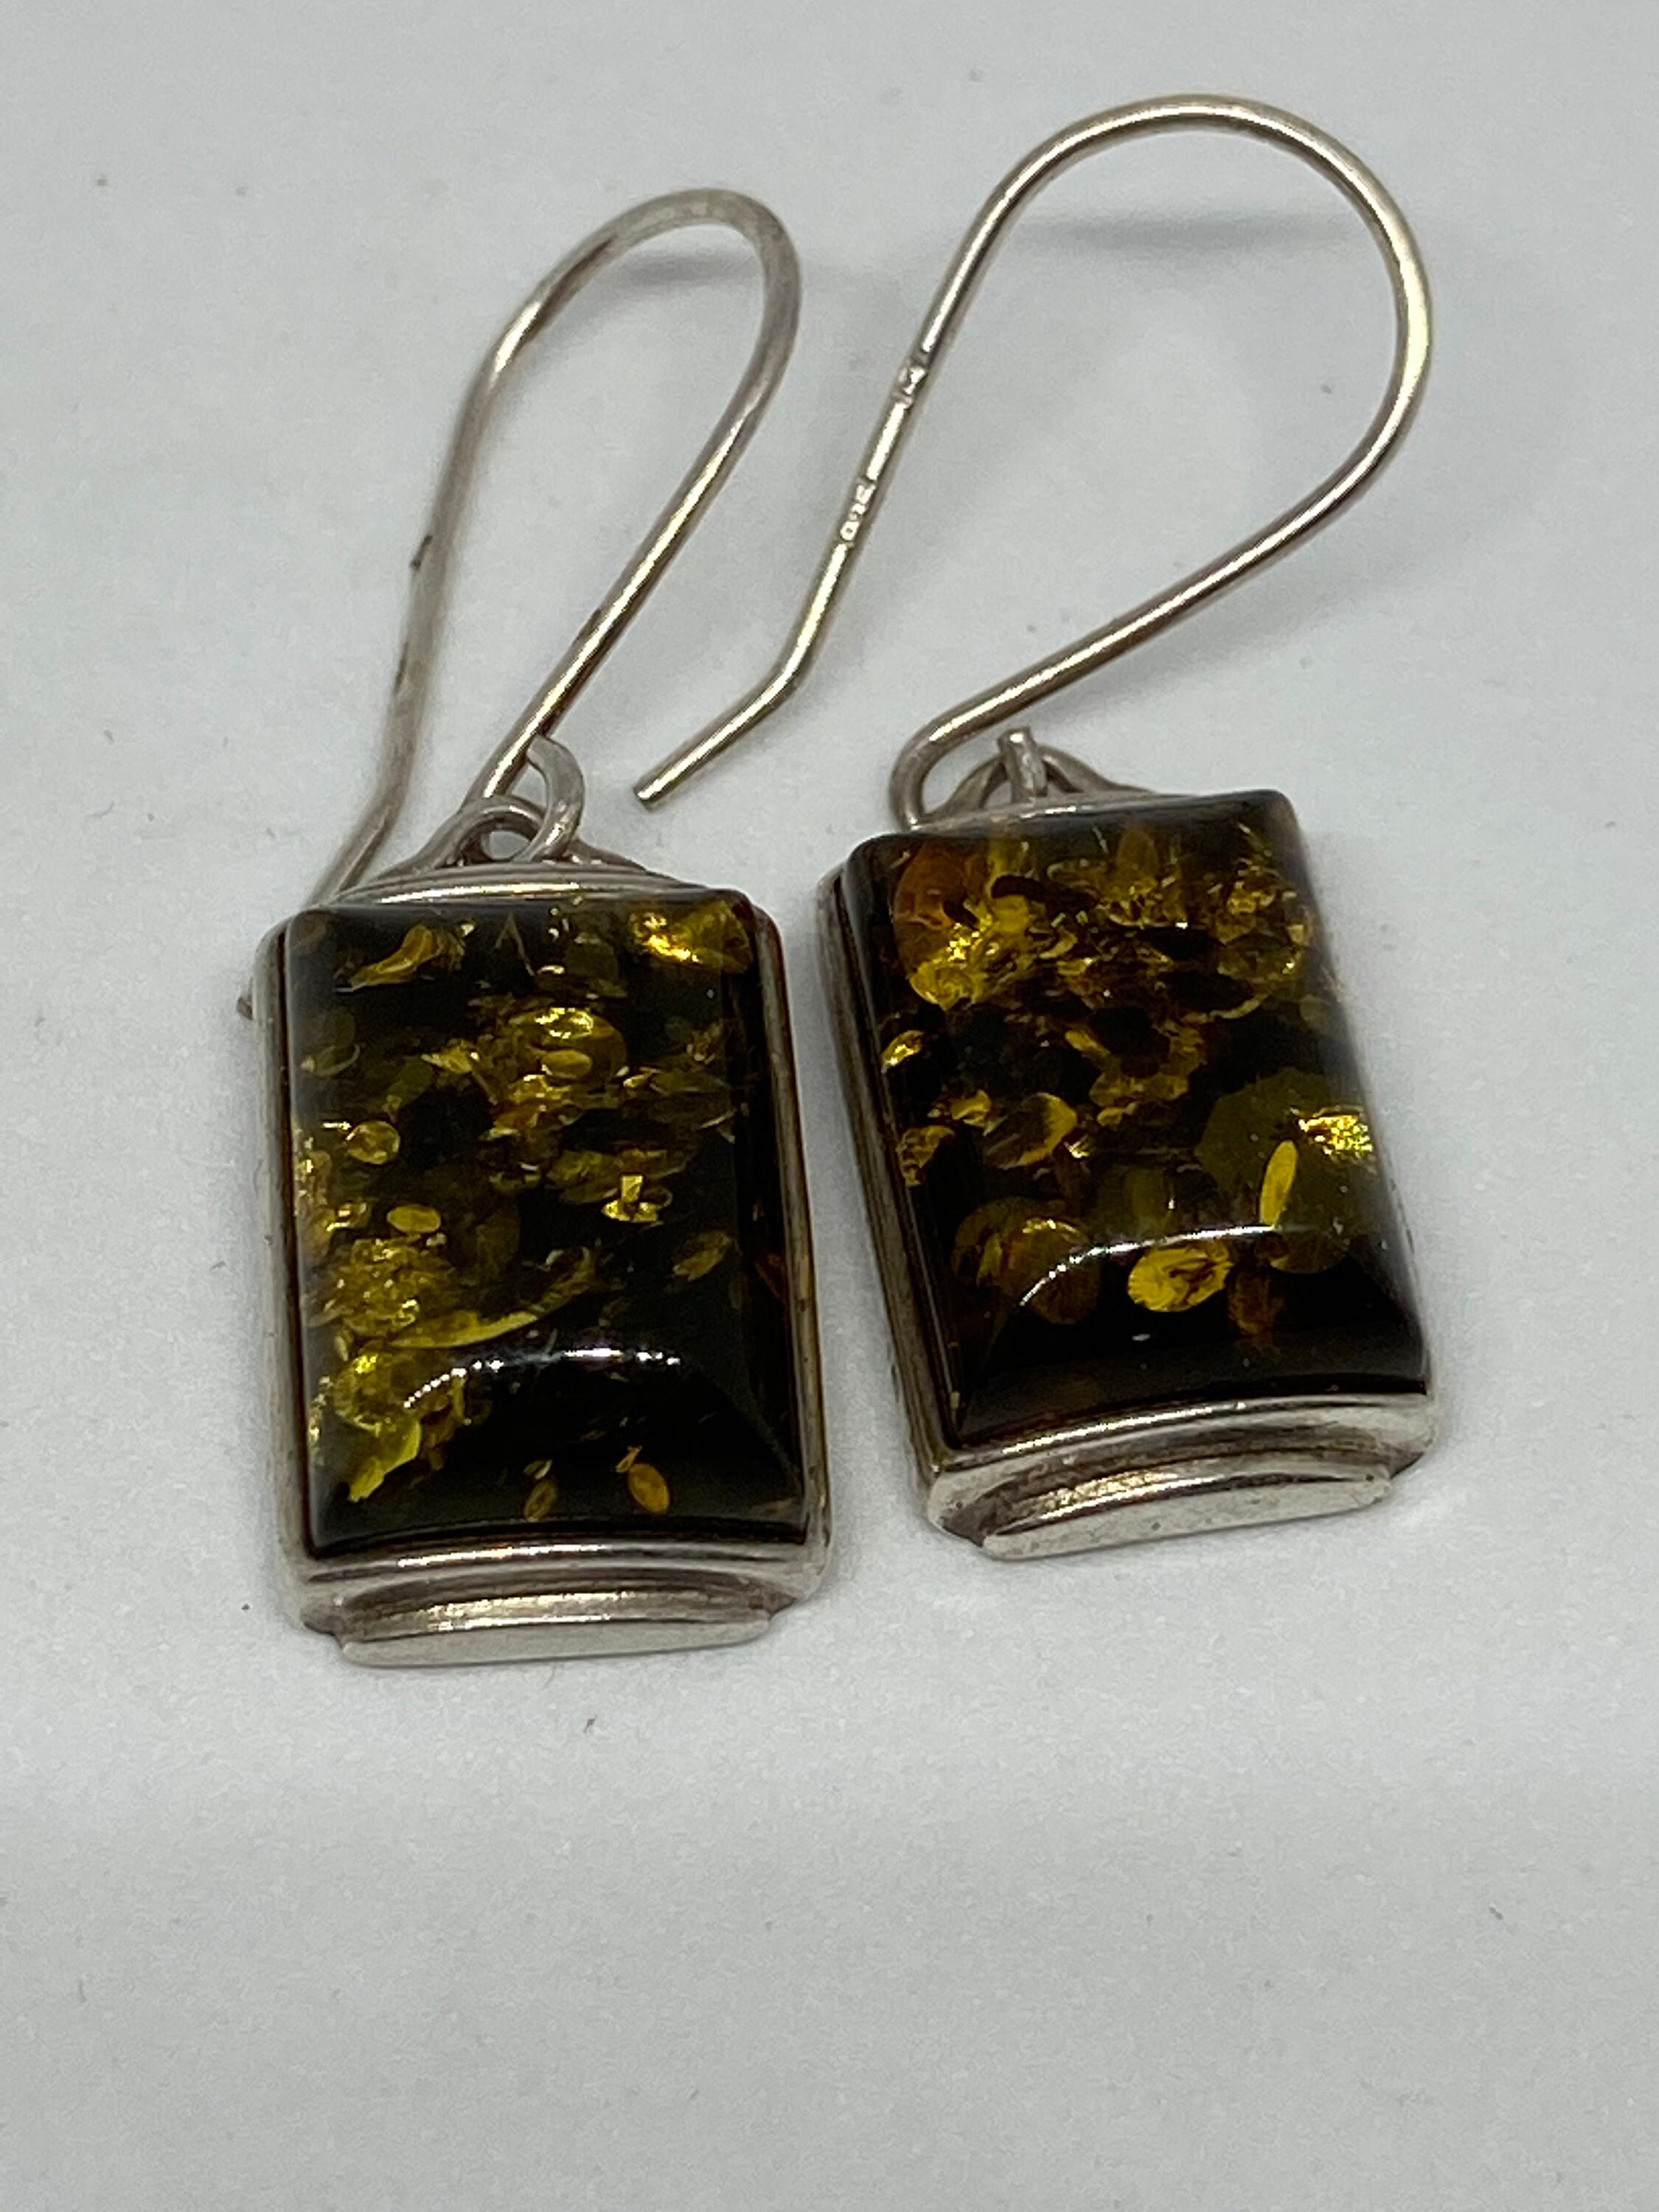 Green BALTIC AMBER Earrings Drop 925 STERLING SILVER Poland #2394 Details about   Genuine 